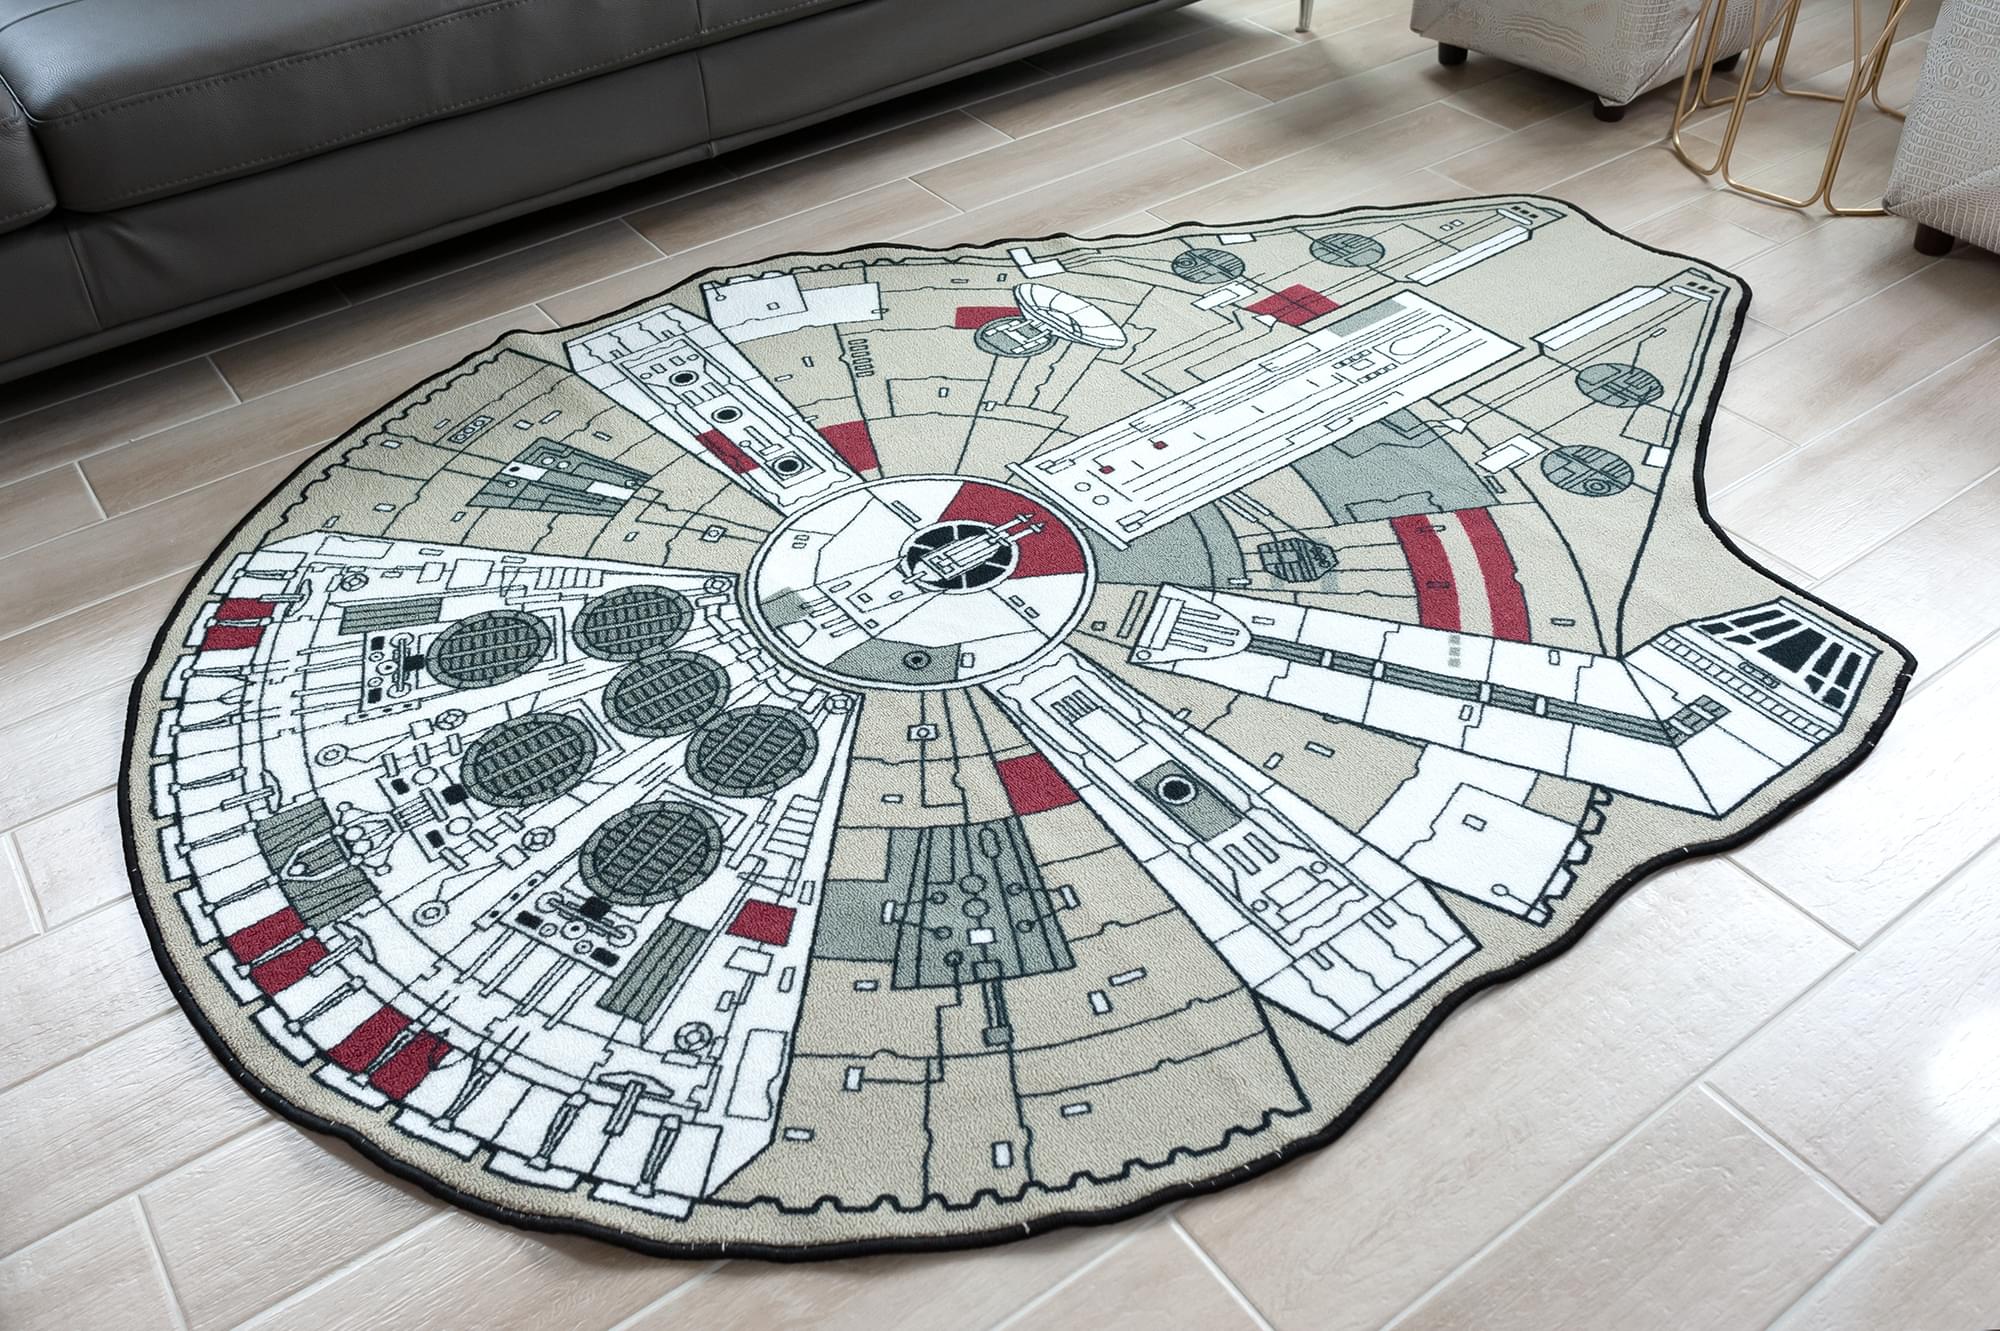 Star Wars Large Millennium Falcon Entry or Area Rug, 59" L x 79" W - image 4 of 7